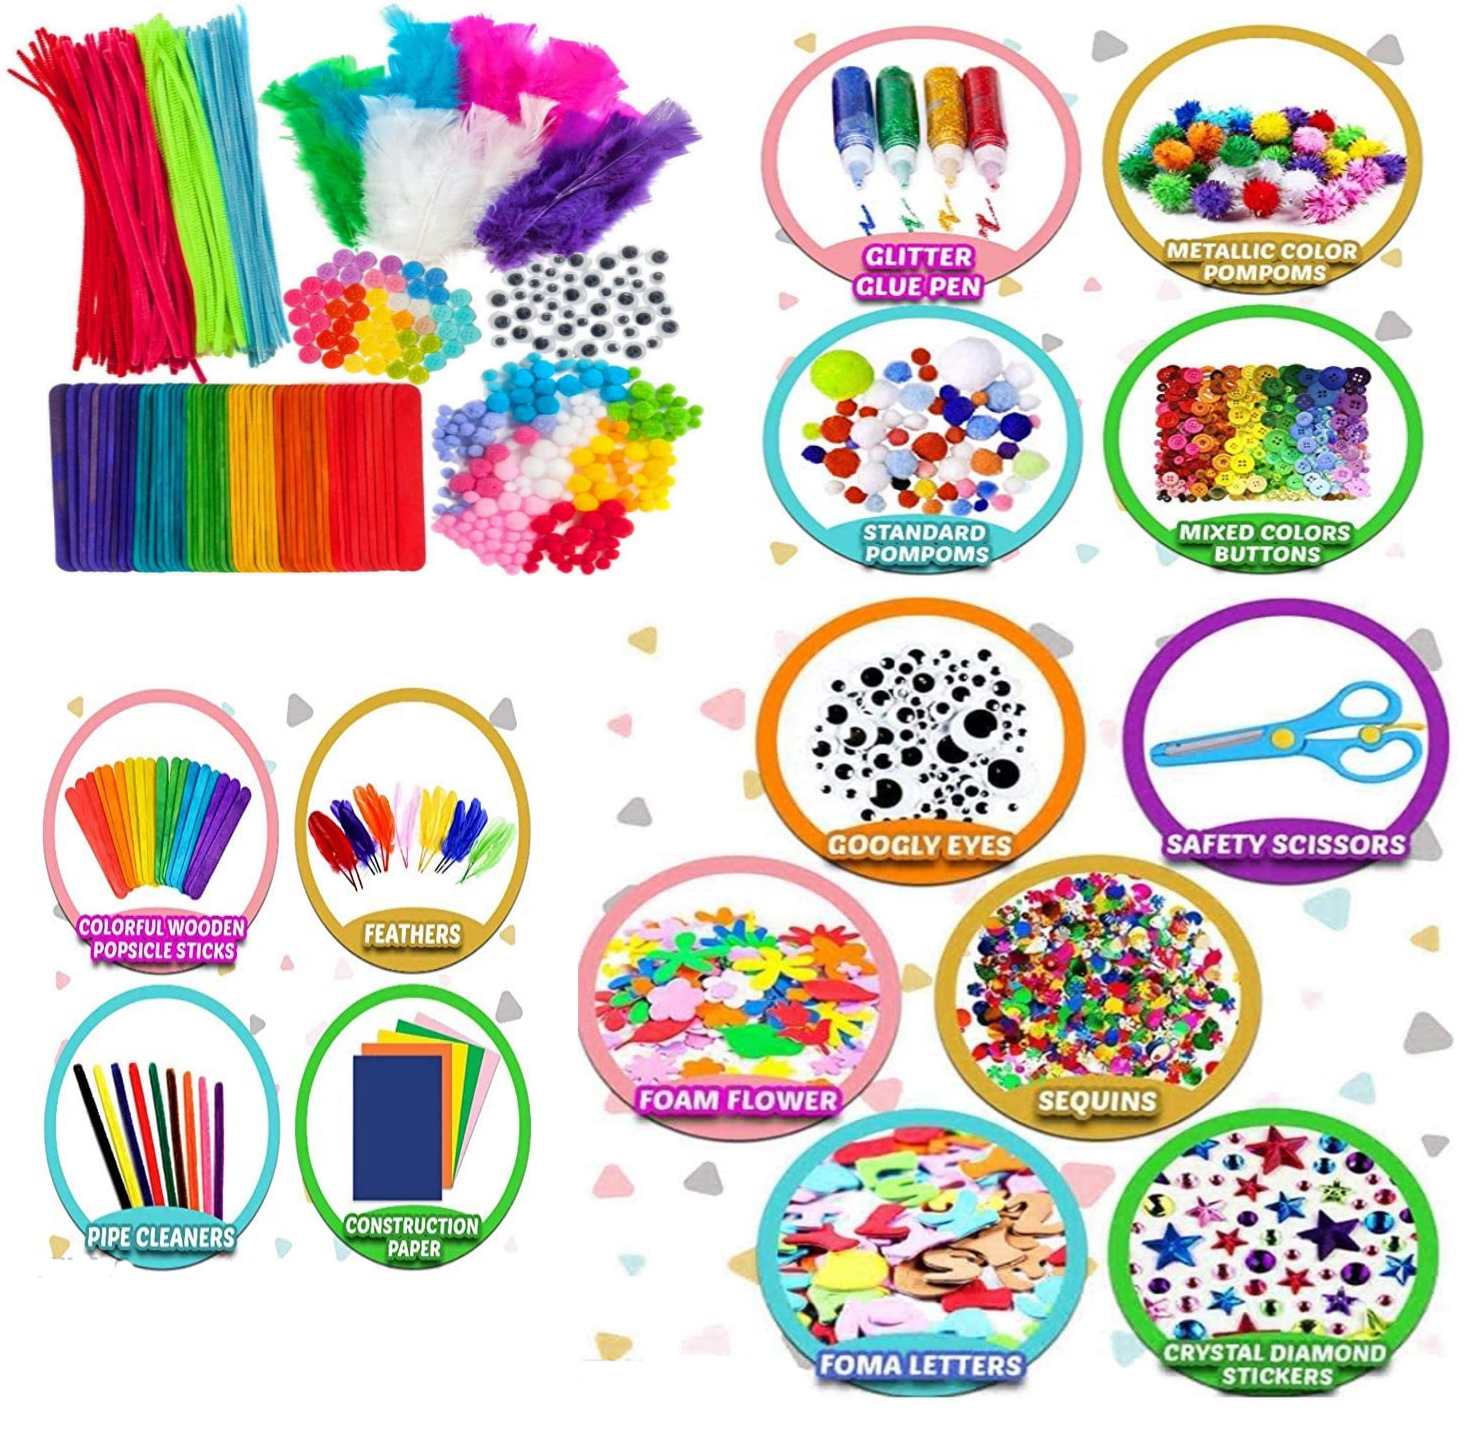 1000PCS Arts and Crafts Supplies for Kids Toddler DIY Art Craft Kits Crafting Materials Toys Set for School Home Projects Craft Supplies